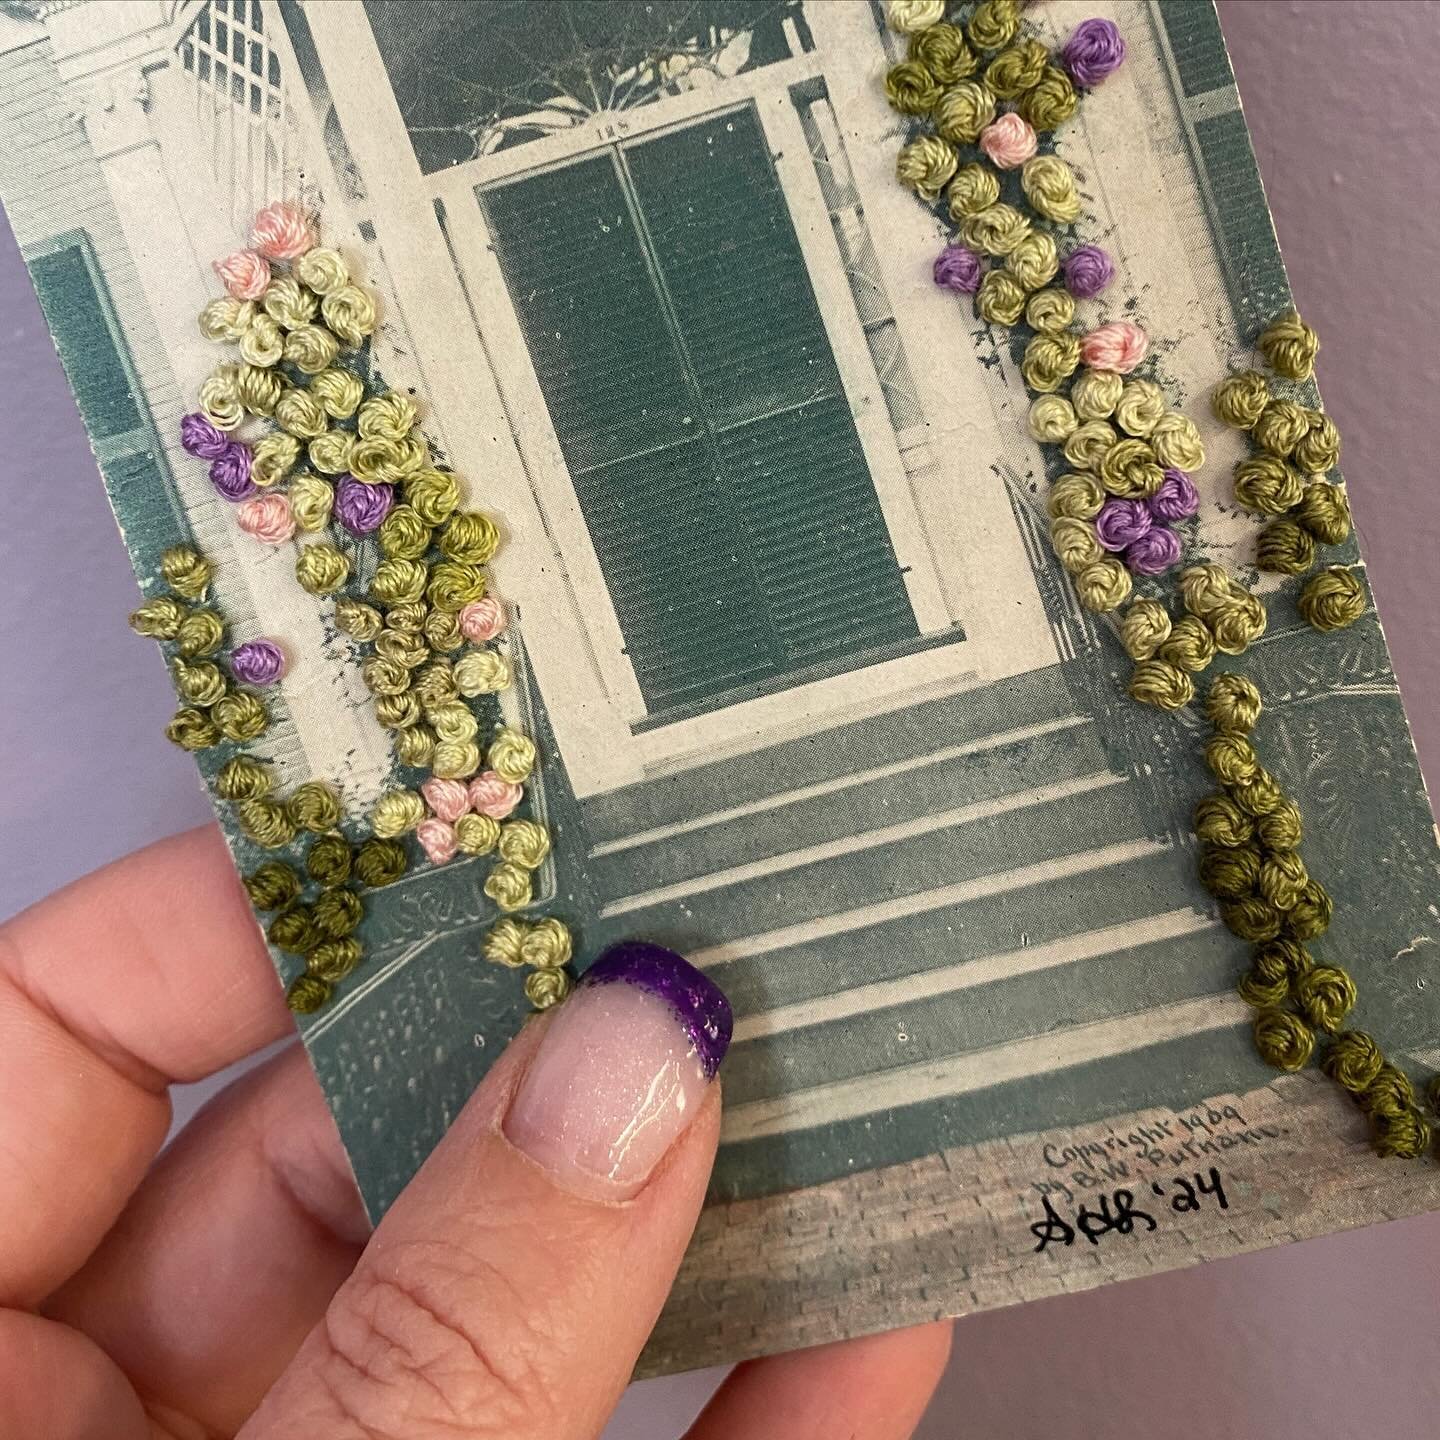 🪡 I found 2 more of the postcards on eBay to add to the series I&rsquo;m embroidering

Once all are completed I&rsquo;ll be having a show, titled of course Doorways of Salem since all the postcards are 1909 doorways of homes in Salem

What are you u